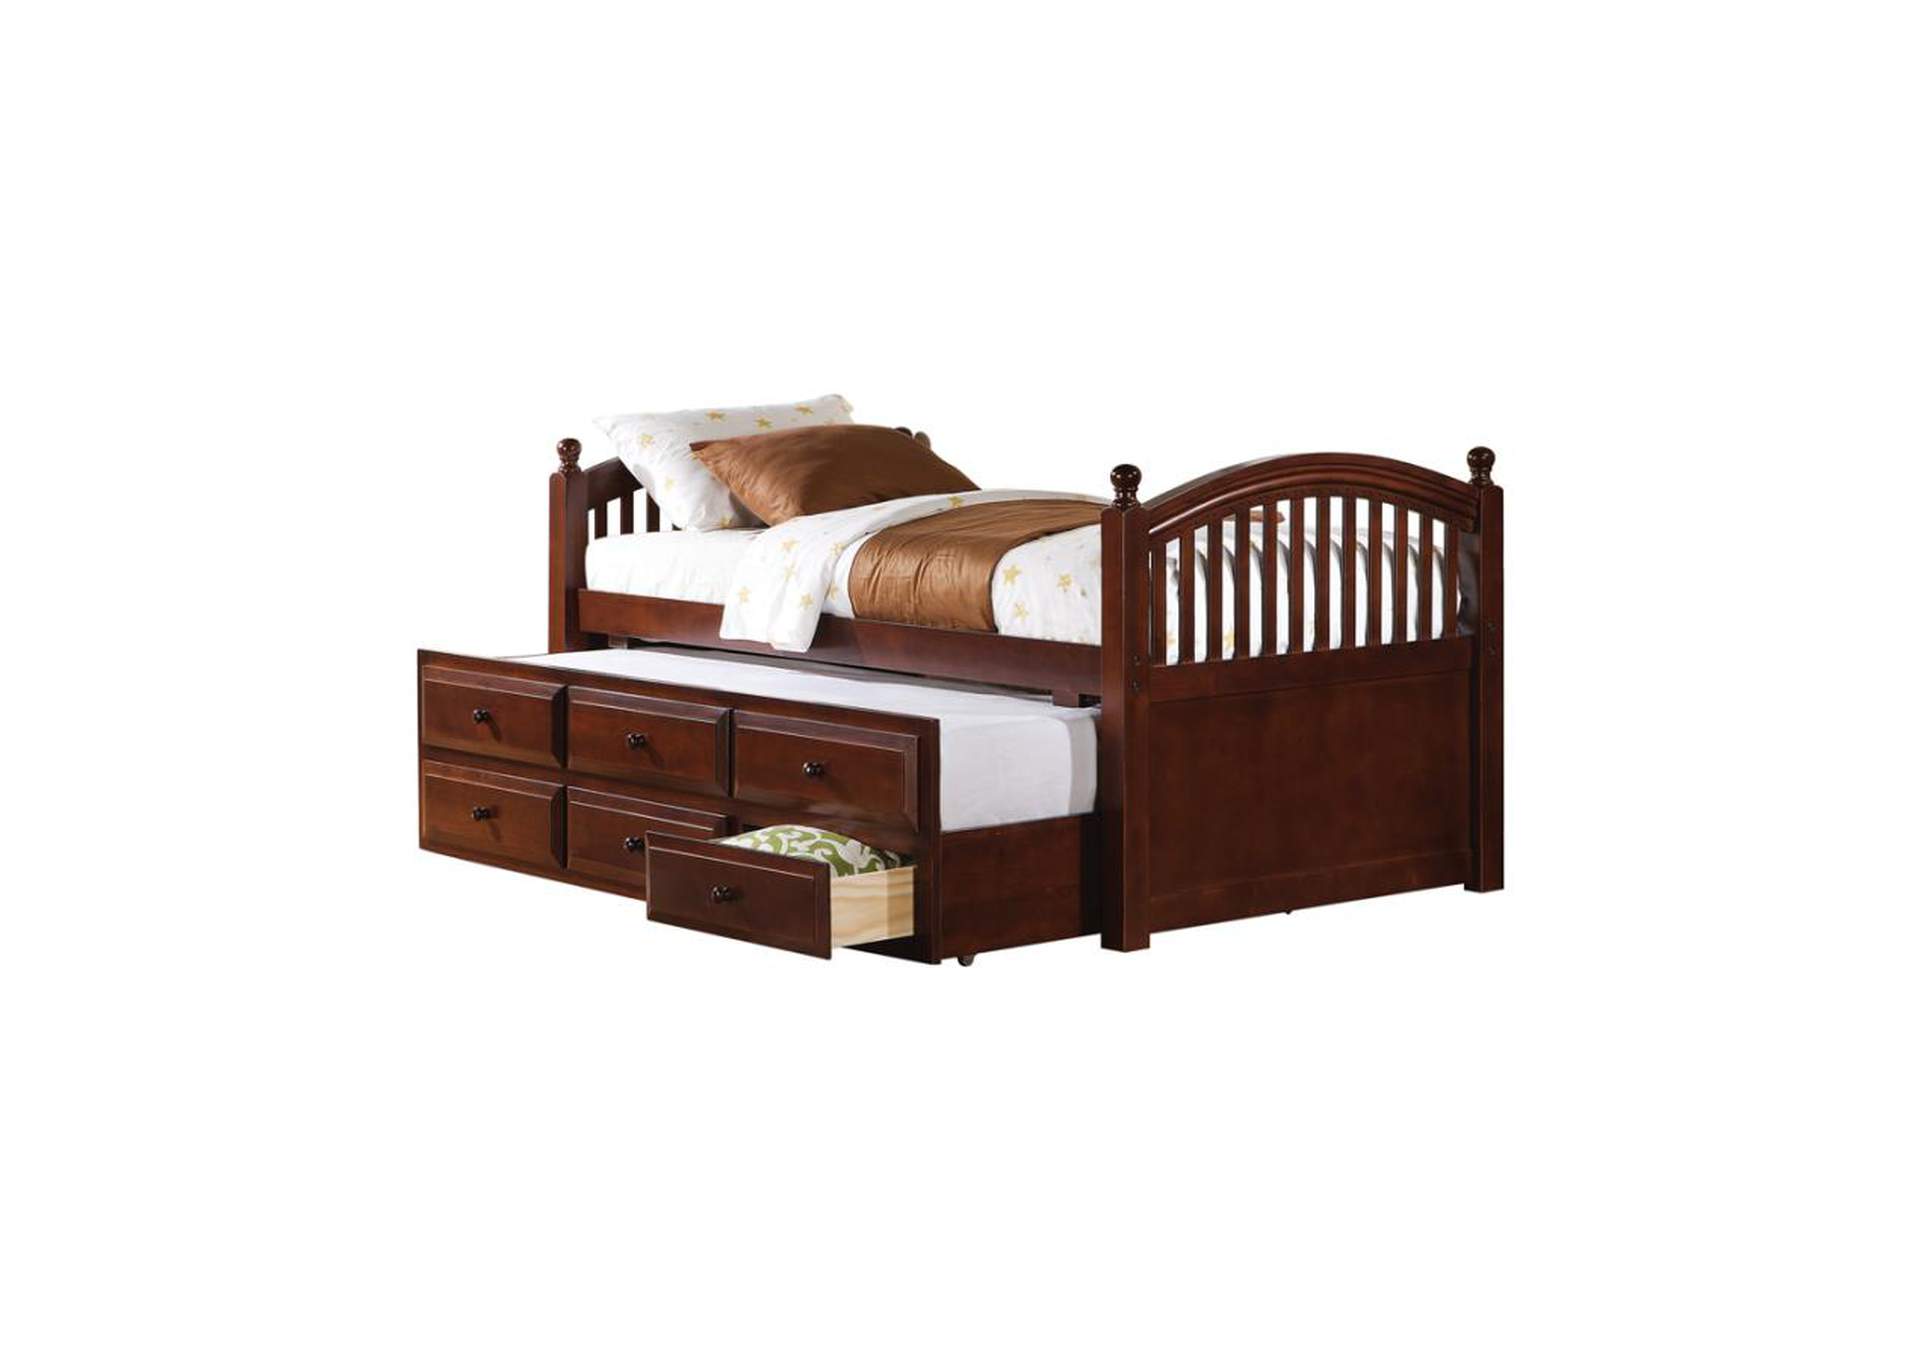 Norwood Twin Captain'S Bed With Trundle And Drawers Chestnut,Coaster Furniture